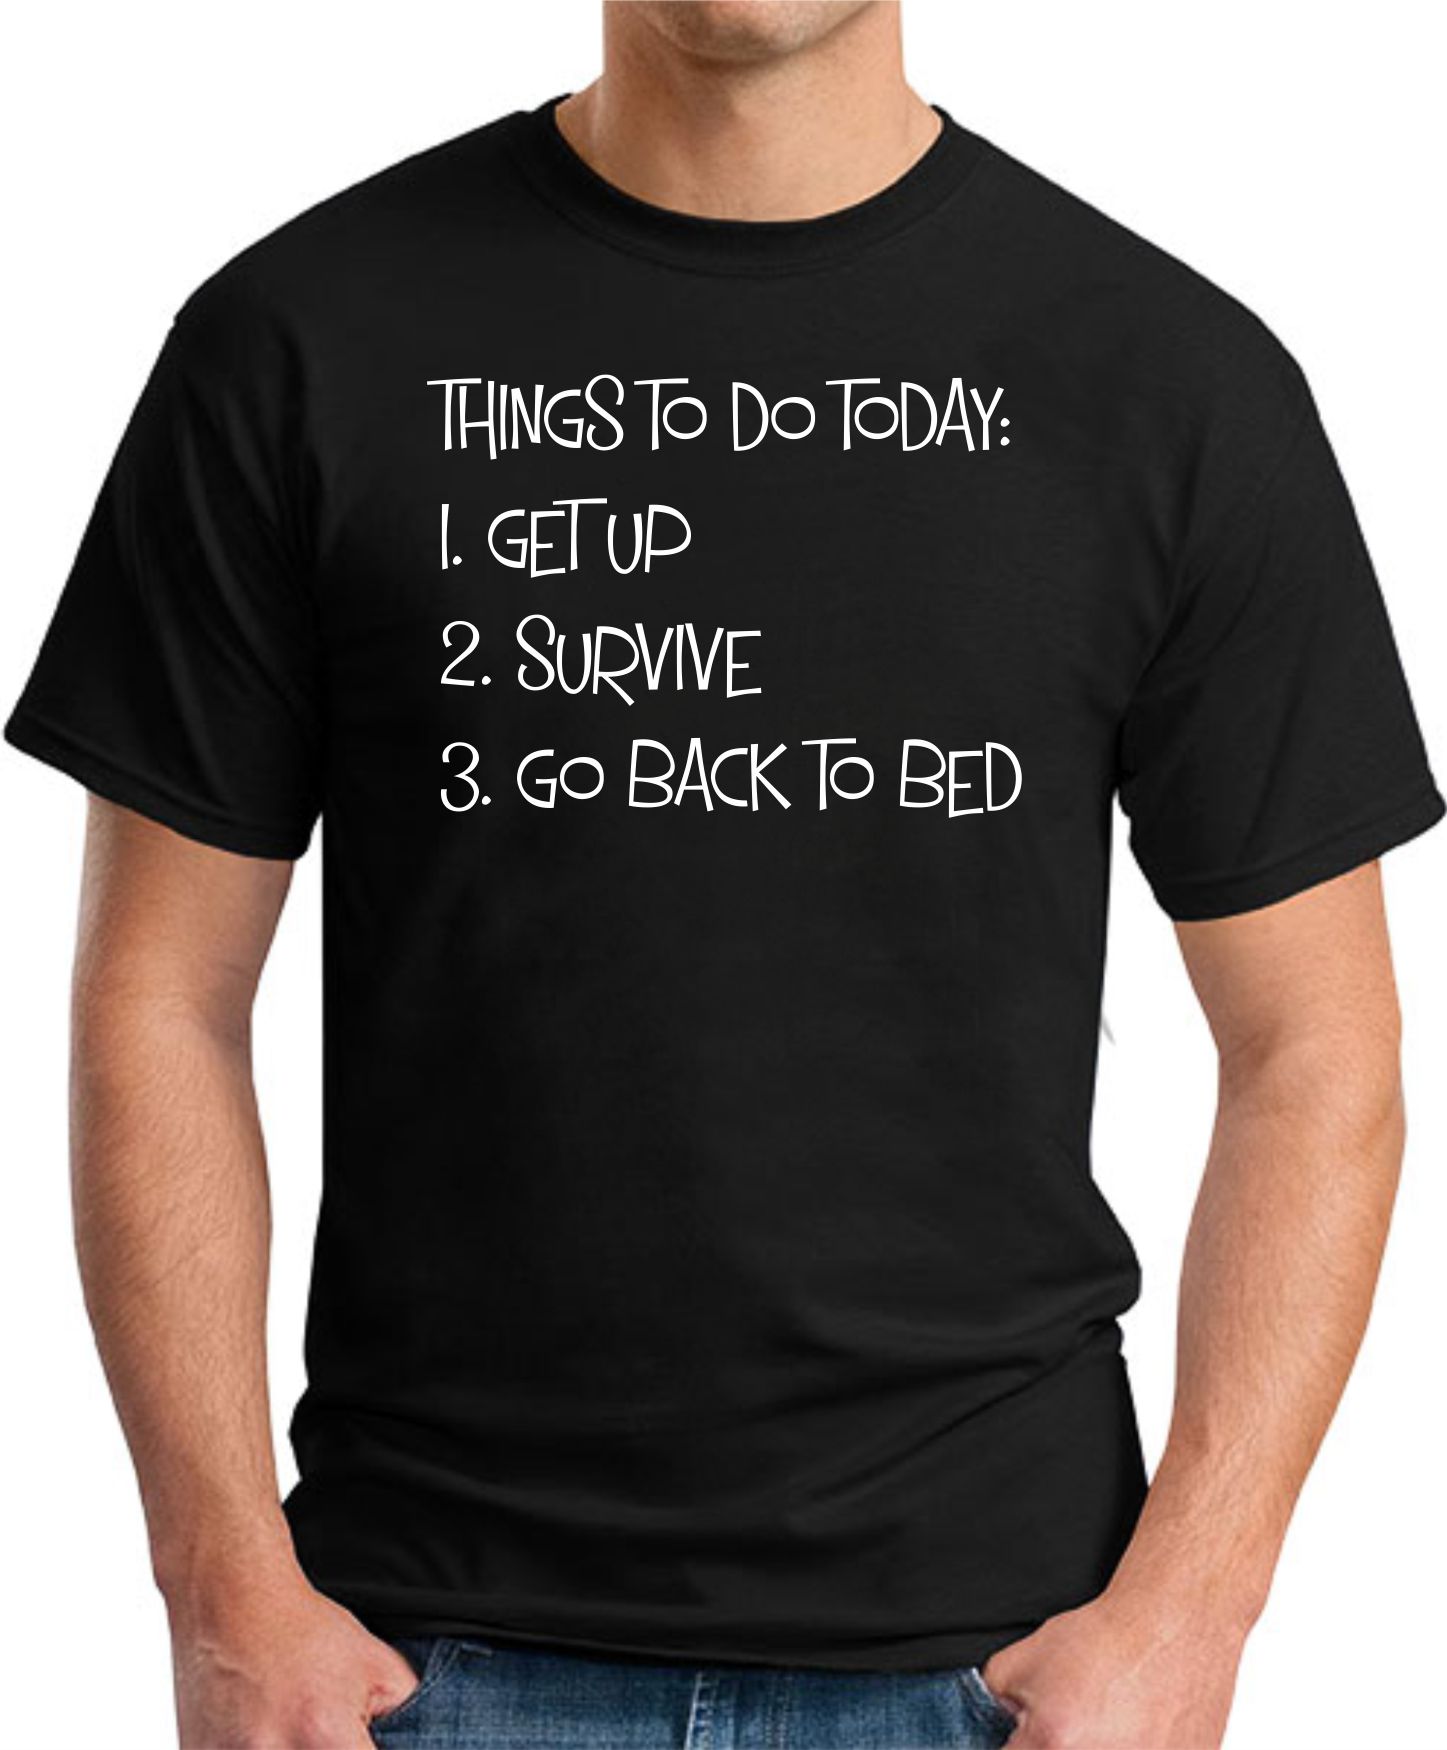 THINGS TO DO TODAY GET UP SURVIVE GO BACK TO BED T-SHIRT - GeekyTees